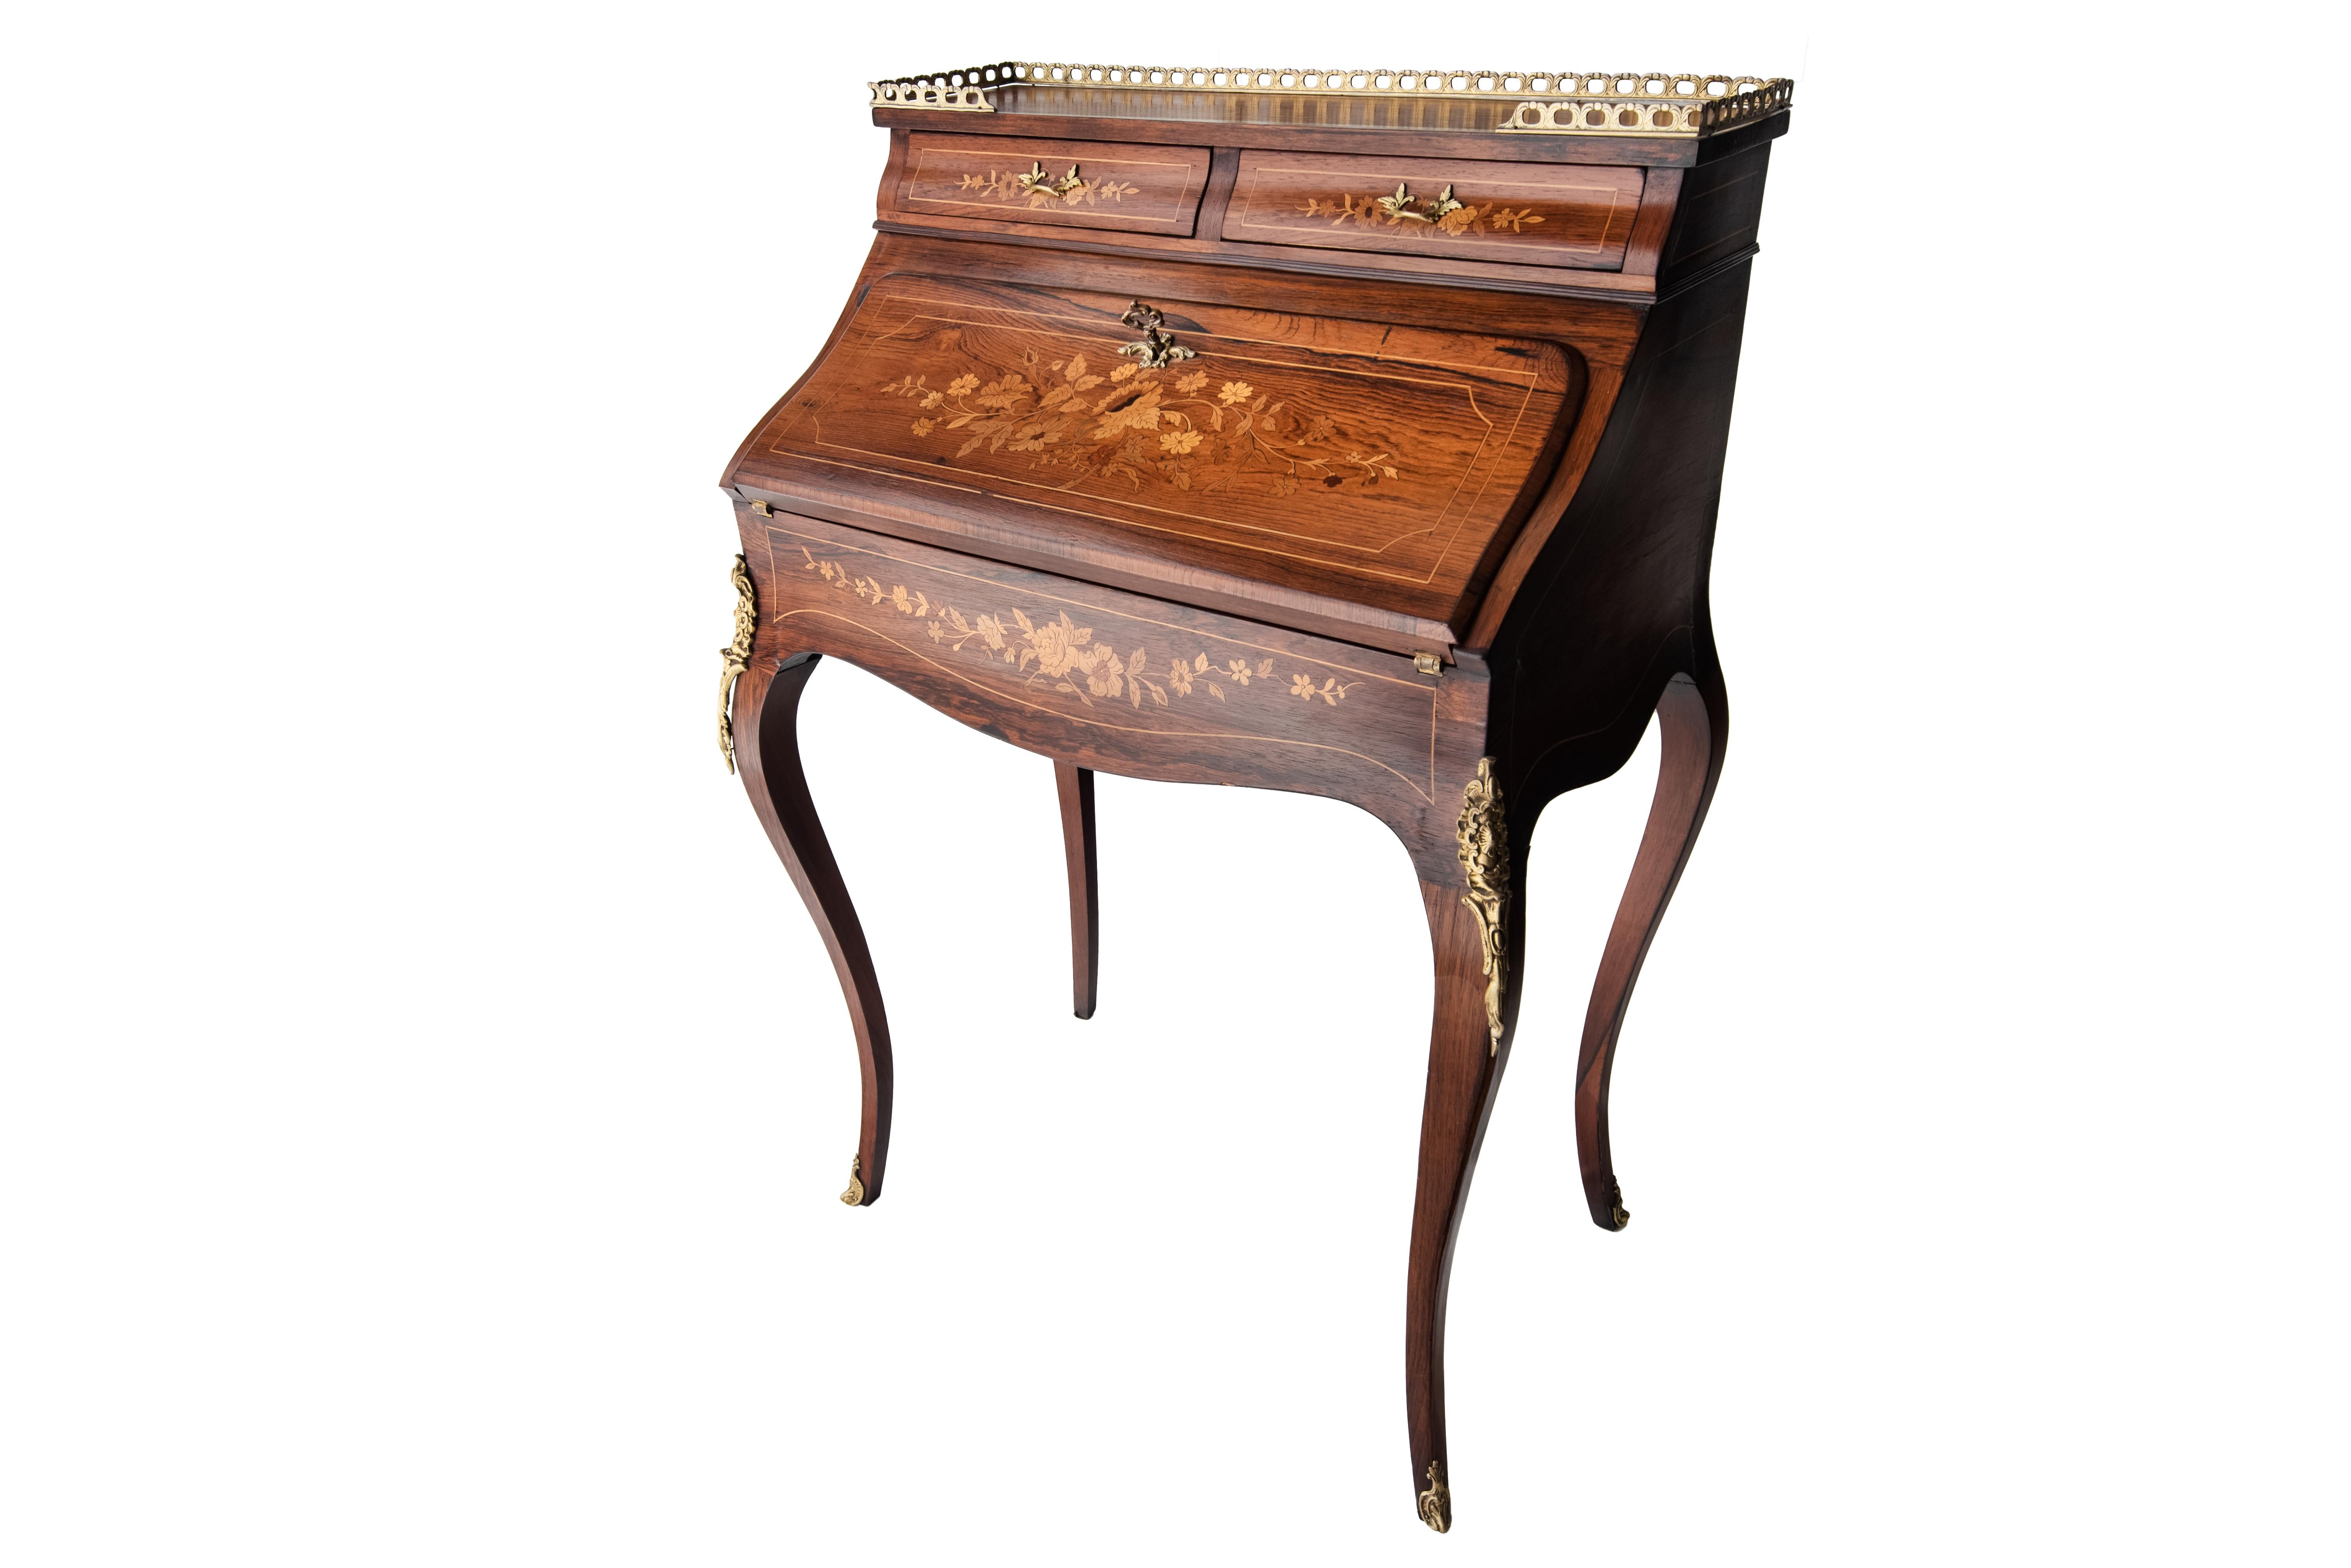 19th century French Louis XV style marquetry bureau desk with secret compartment, circa 1870.
It is decorated throughout with beautiful floral marquetry and the 
 the cylinder has a stunning marquetry panel. It has a beautiful top with a gilt